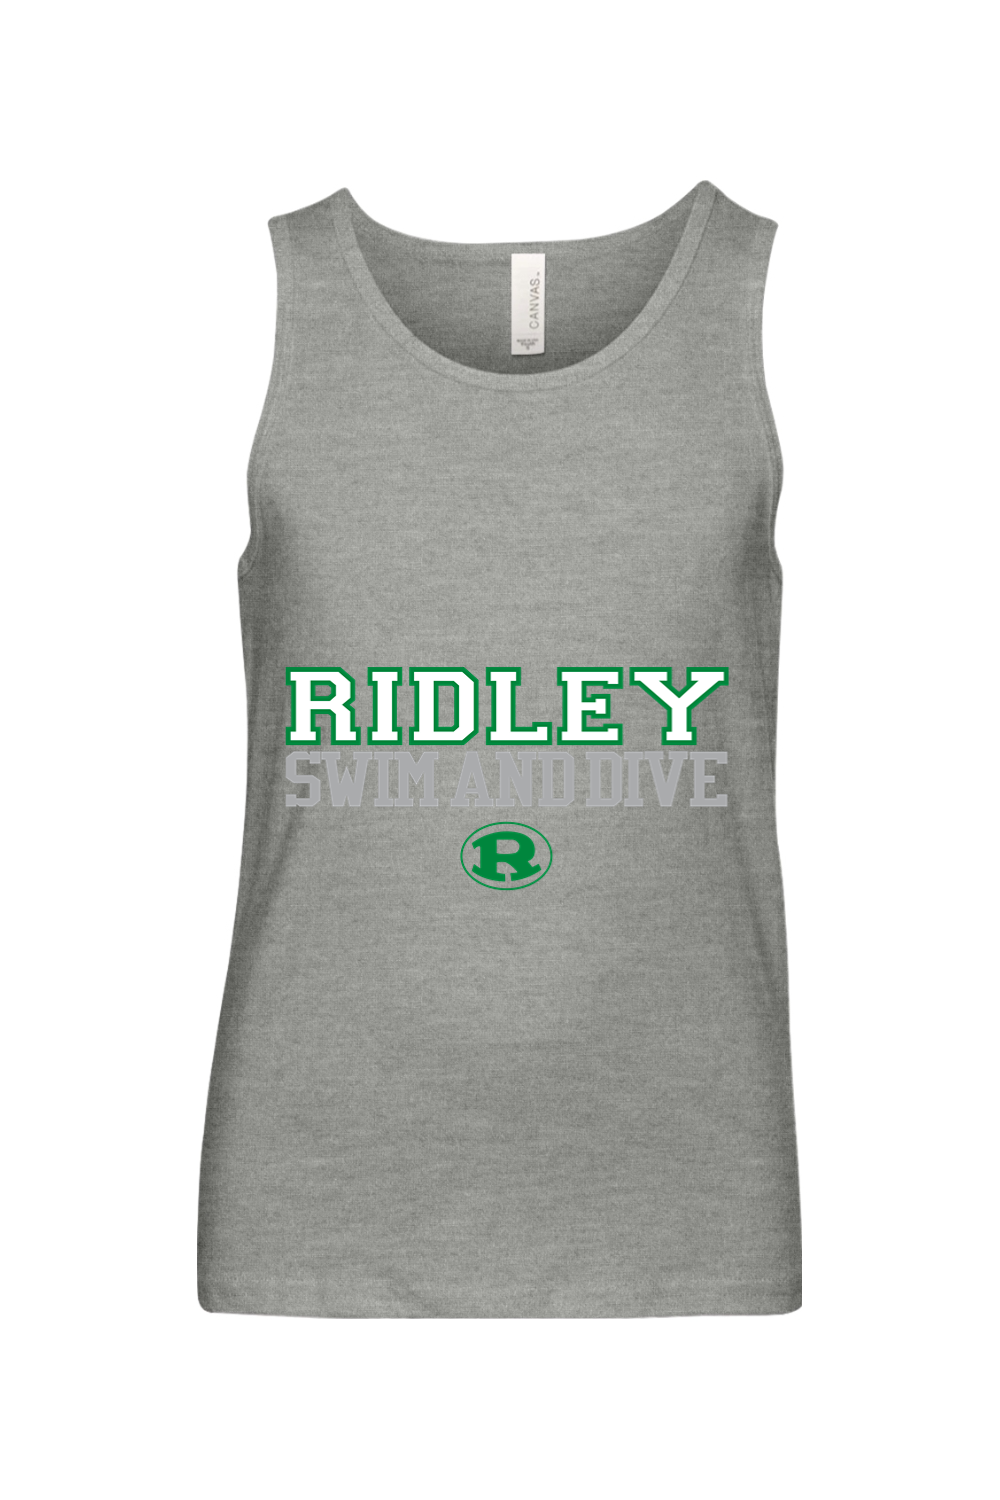 Ridley Swim and Dive Youth Jersey Tank